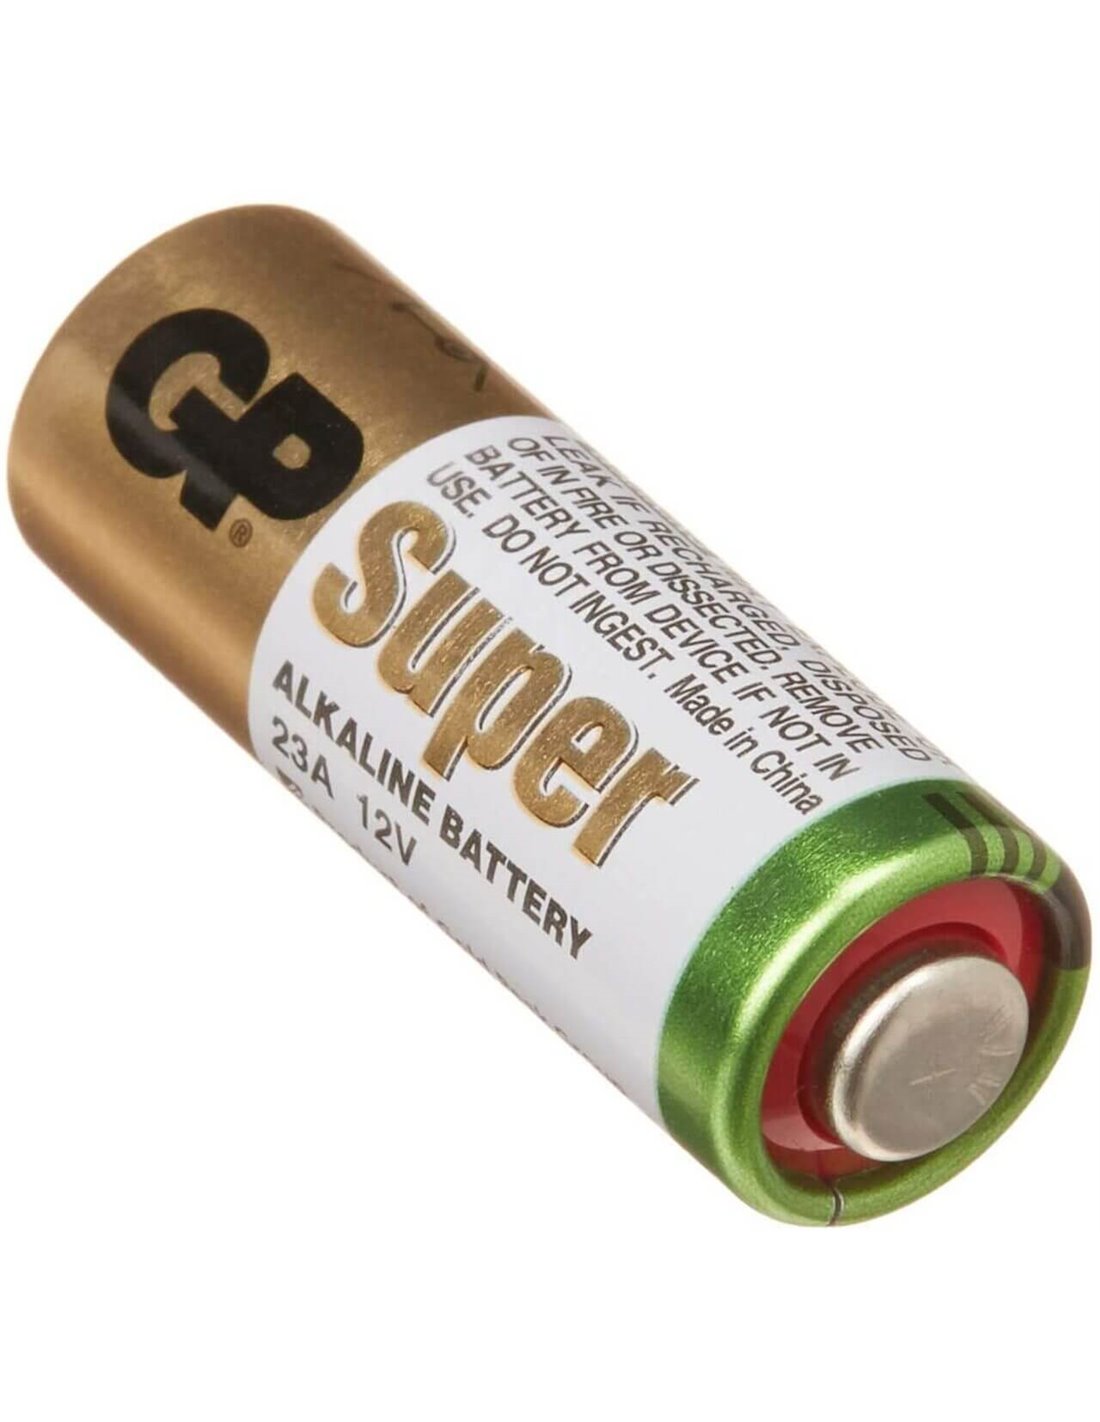 Of 500 0% Mercury 23A 12V Alkaline Batteries For Remote Control 6 Alarm  L1028 Dry Bies From Eastred, $117.97